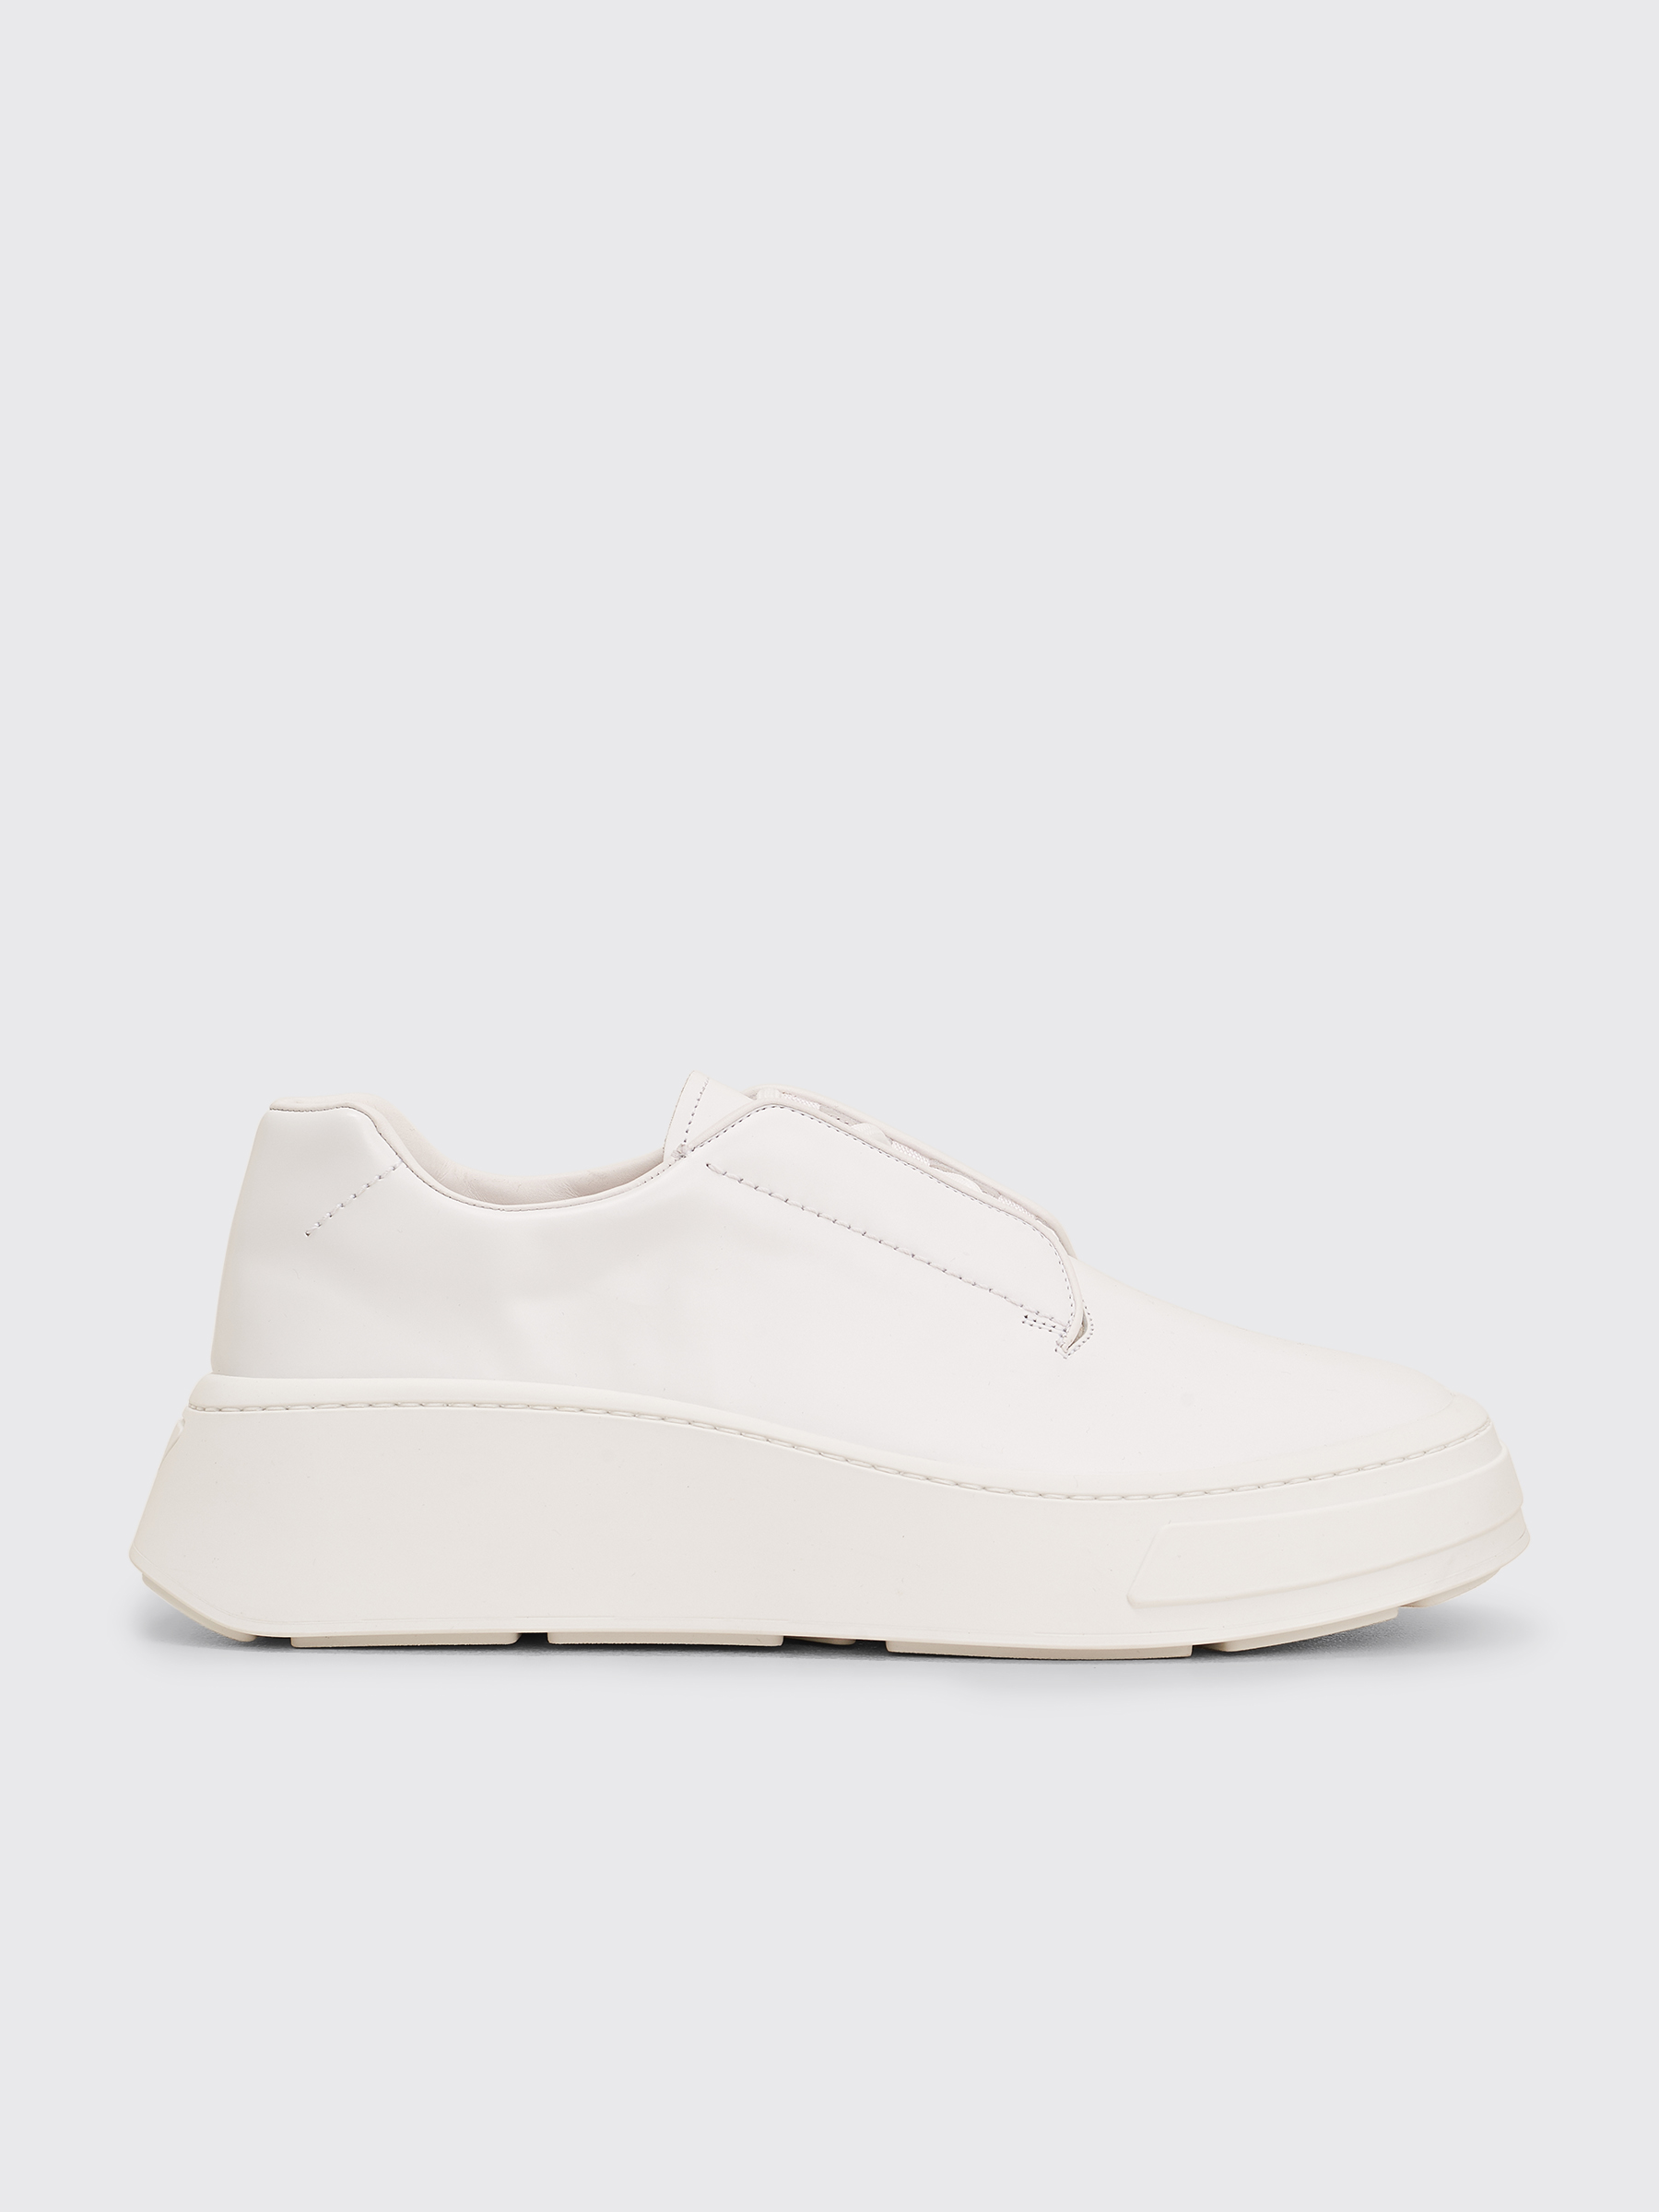 Prada Leather Lace Up Shoes White